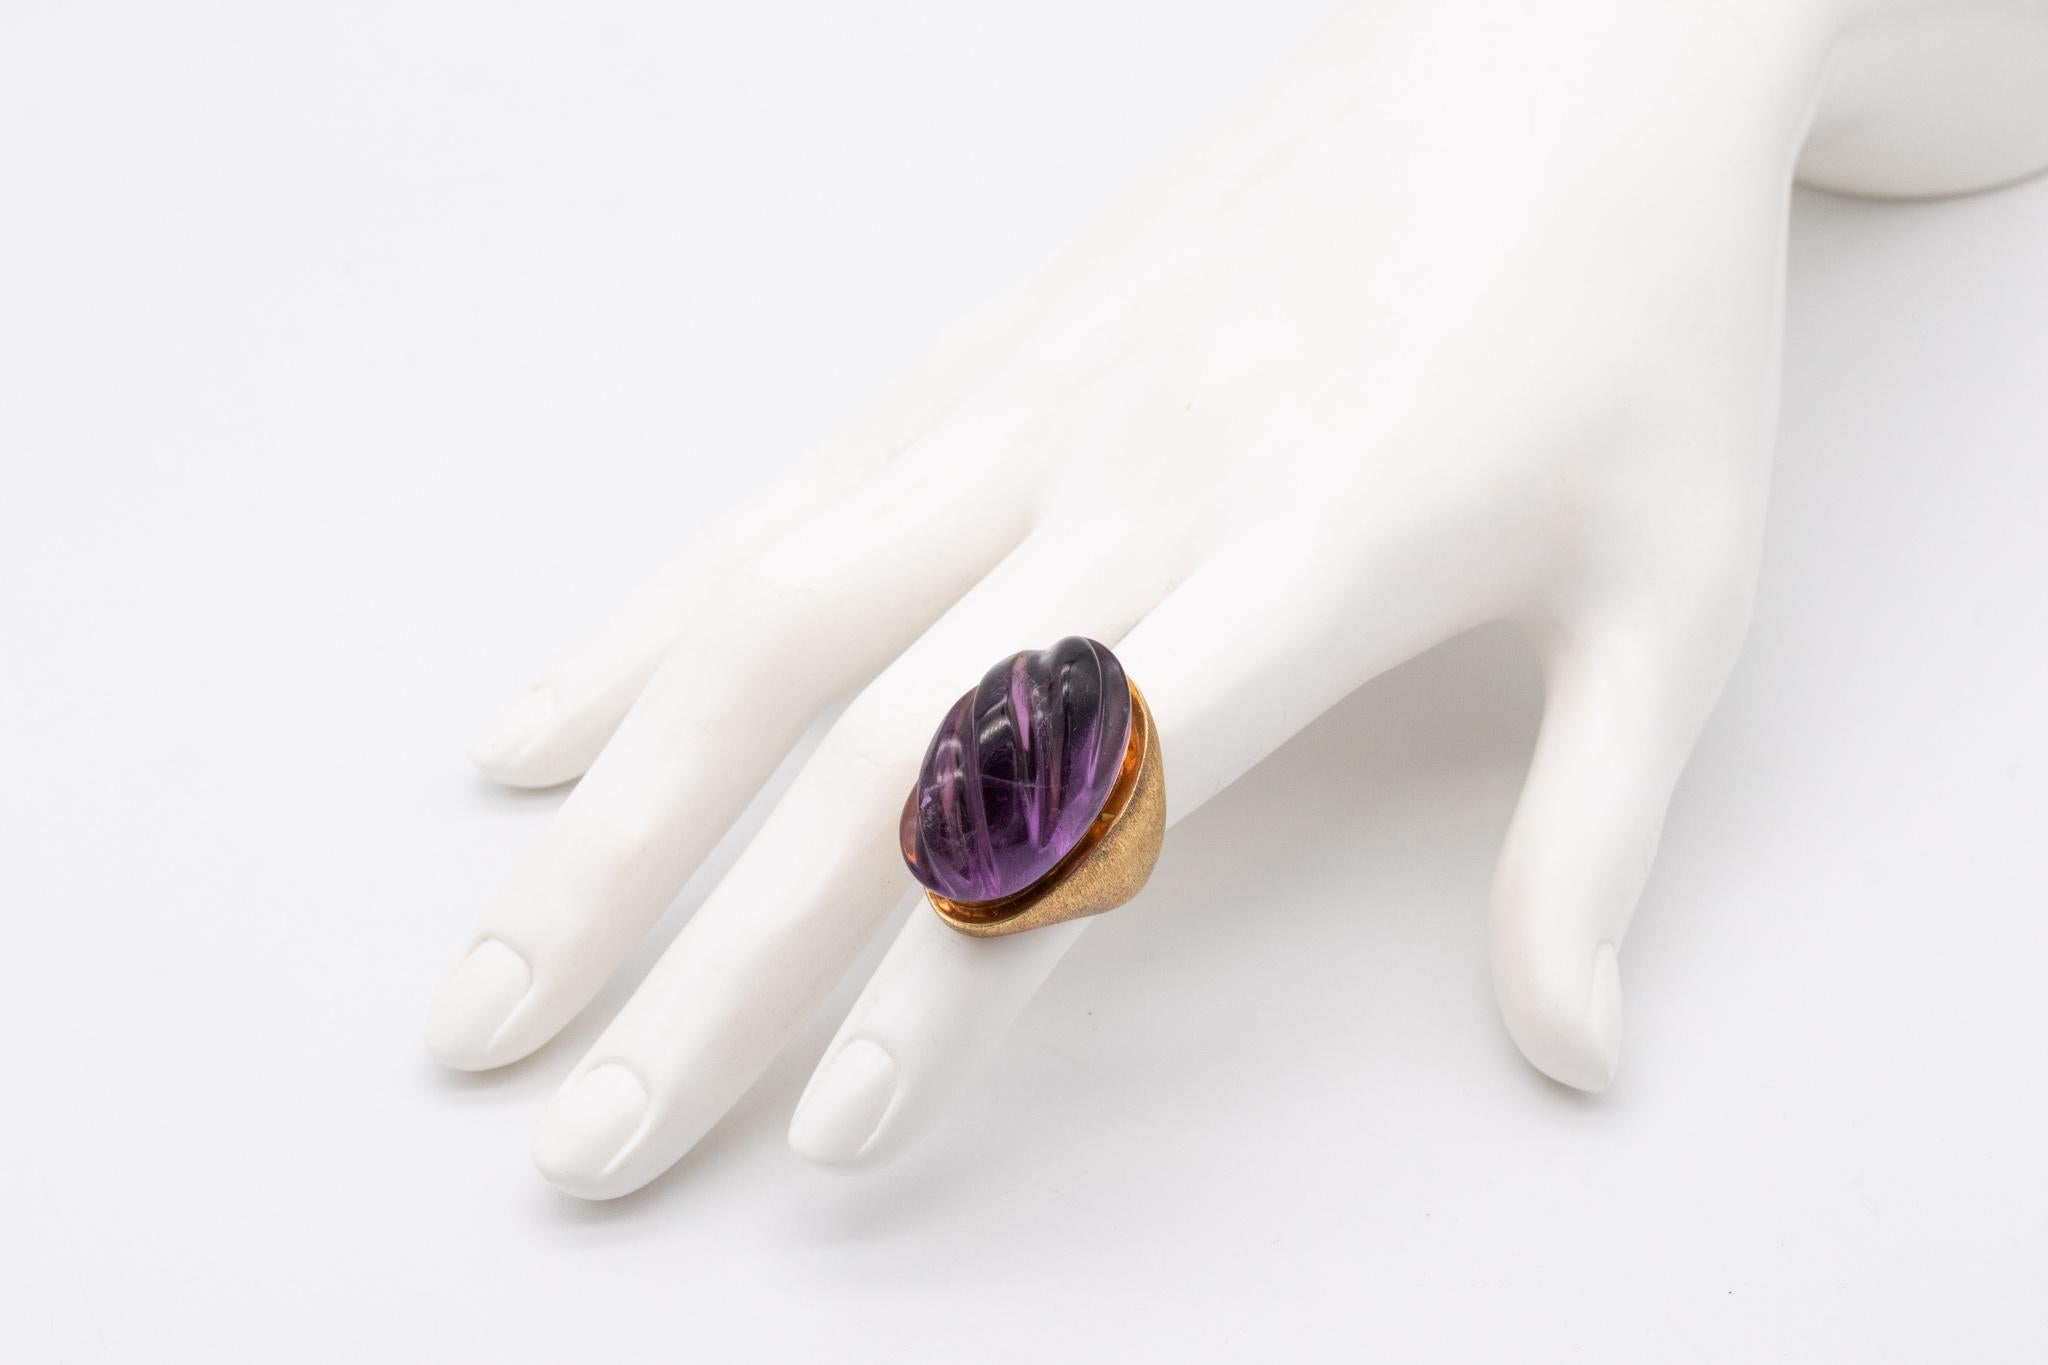 Mixed Cut Burle Marx 1960 Brazil Forma Livre Cocktail Ring 18Kt Gold 35cts Carved Amethyst